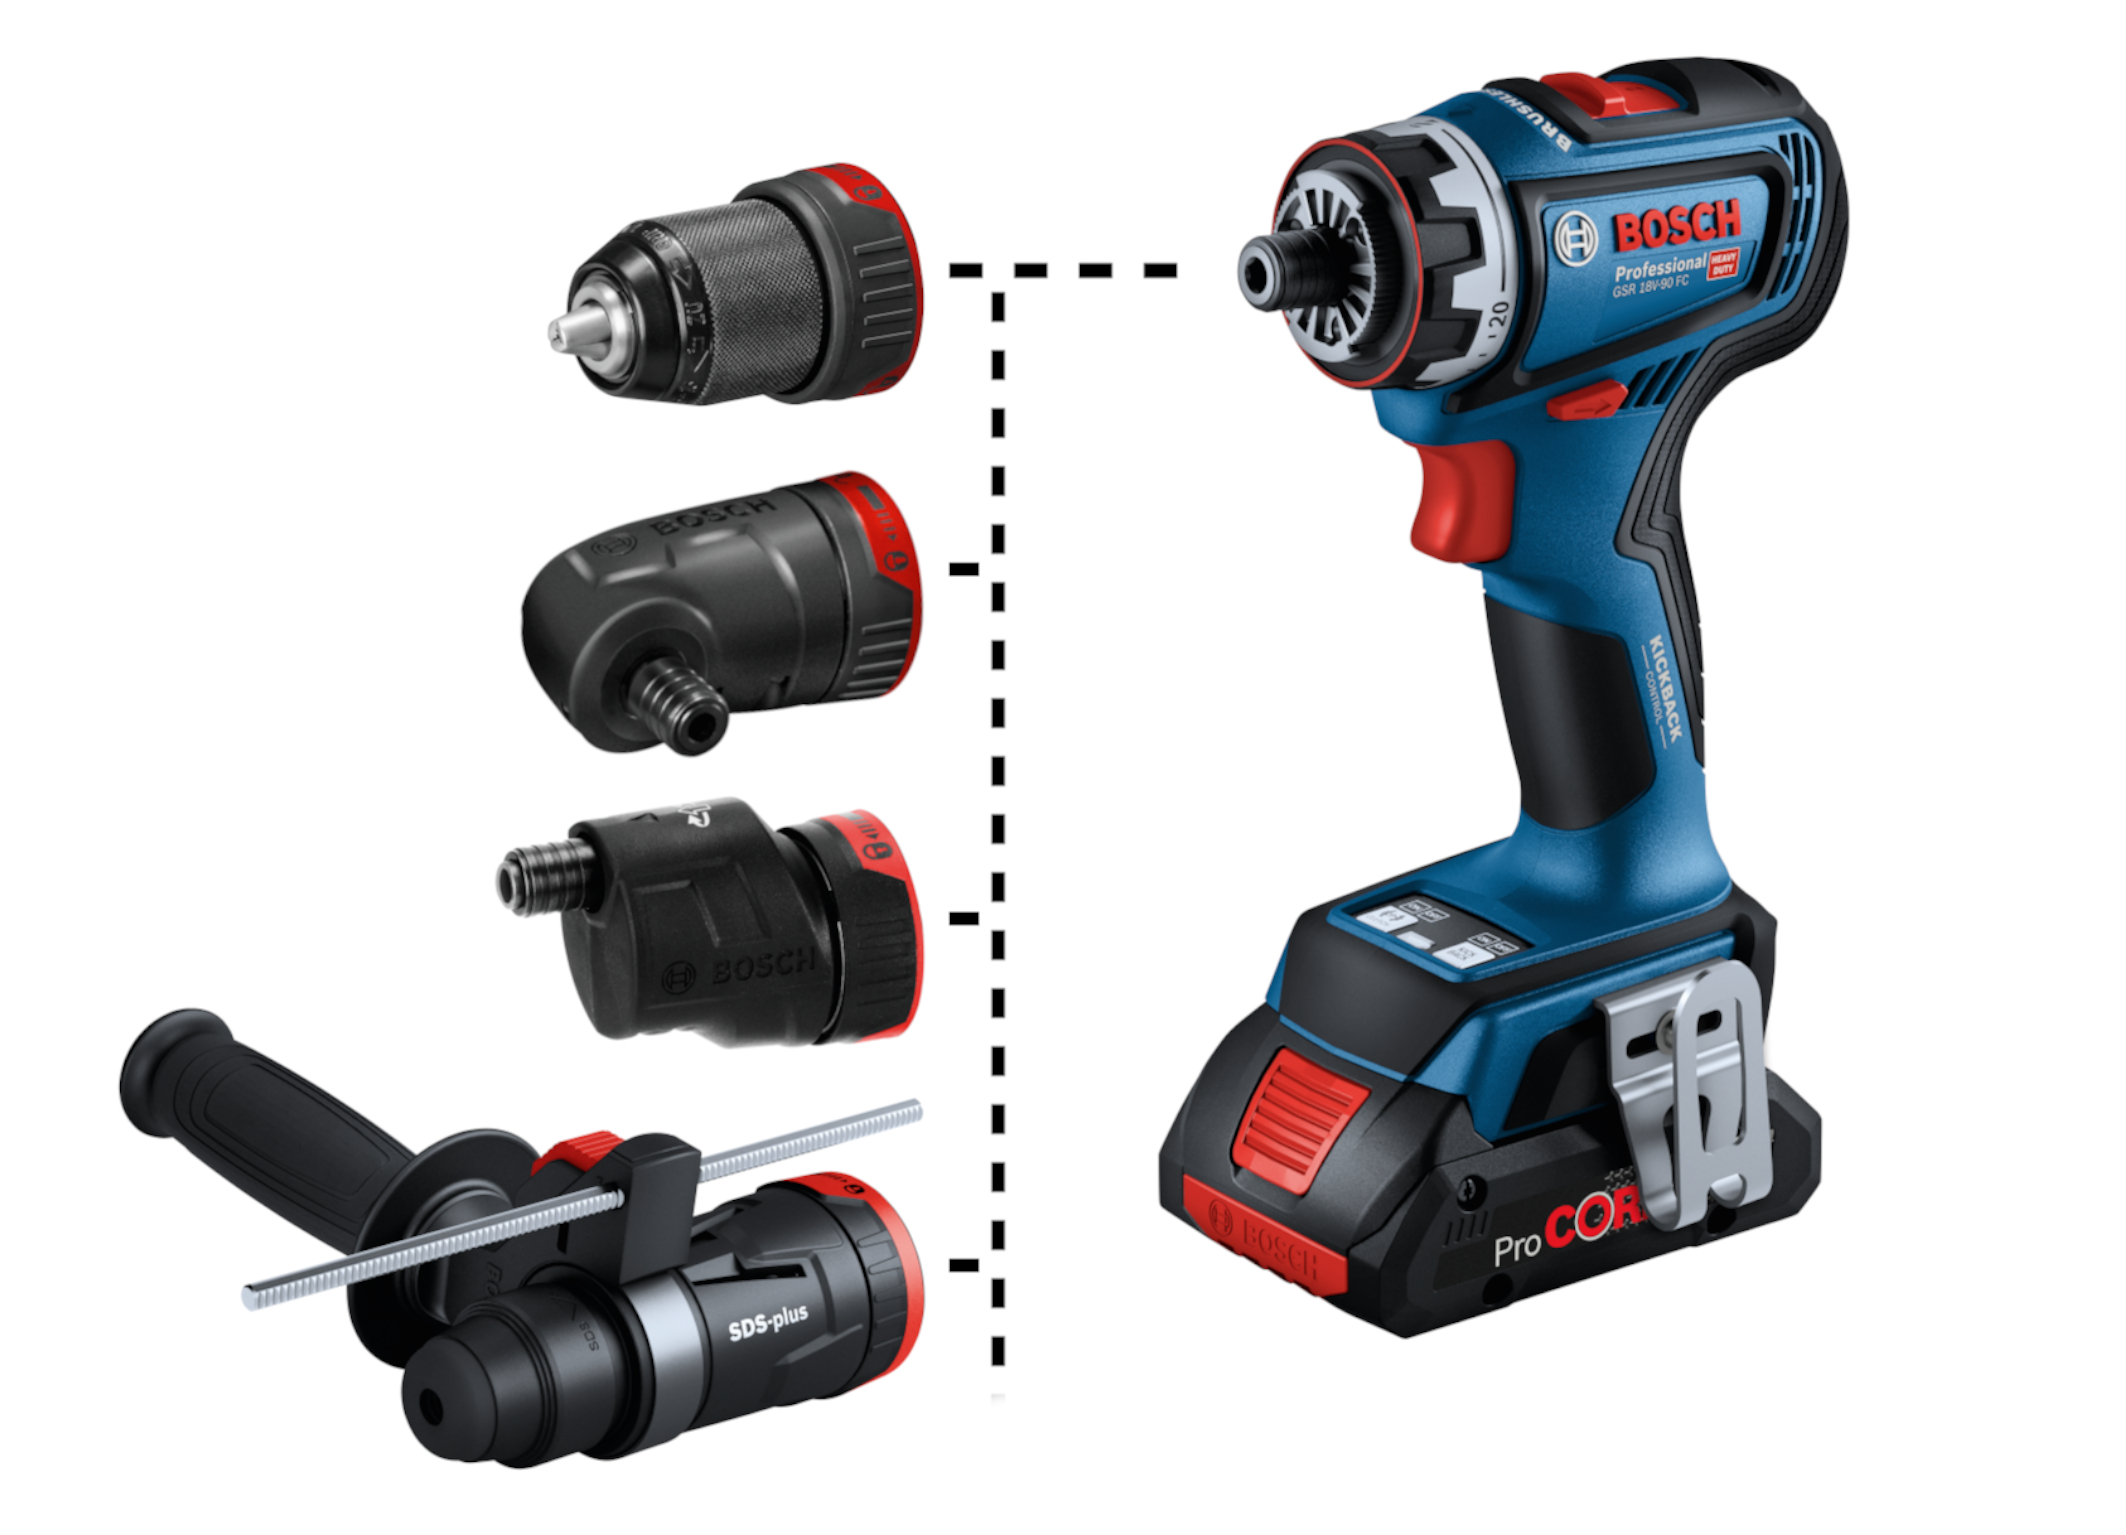 Strong addition to the Professional 18V System: New professional FlexiClick drill driver from Bosch